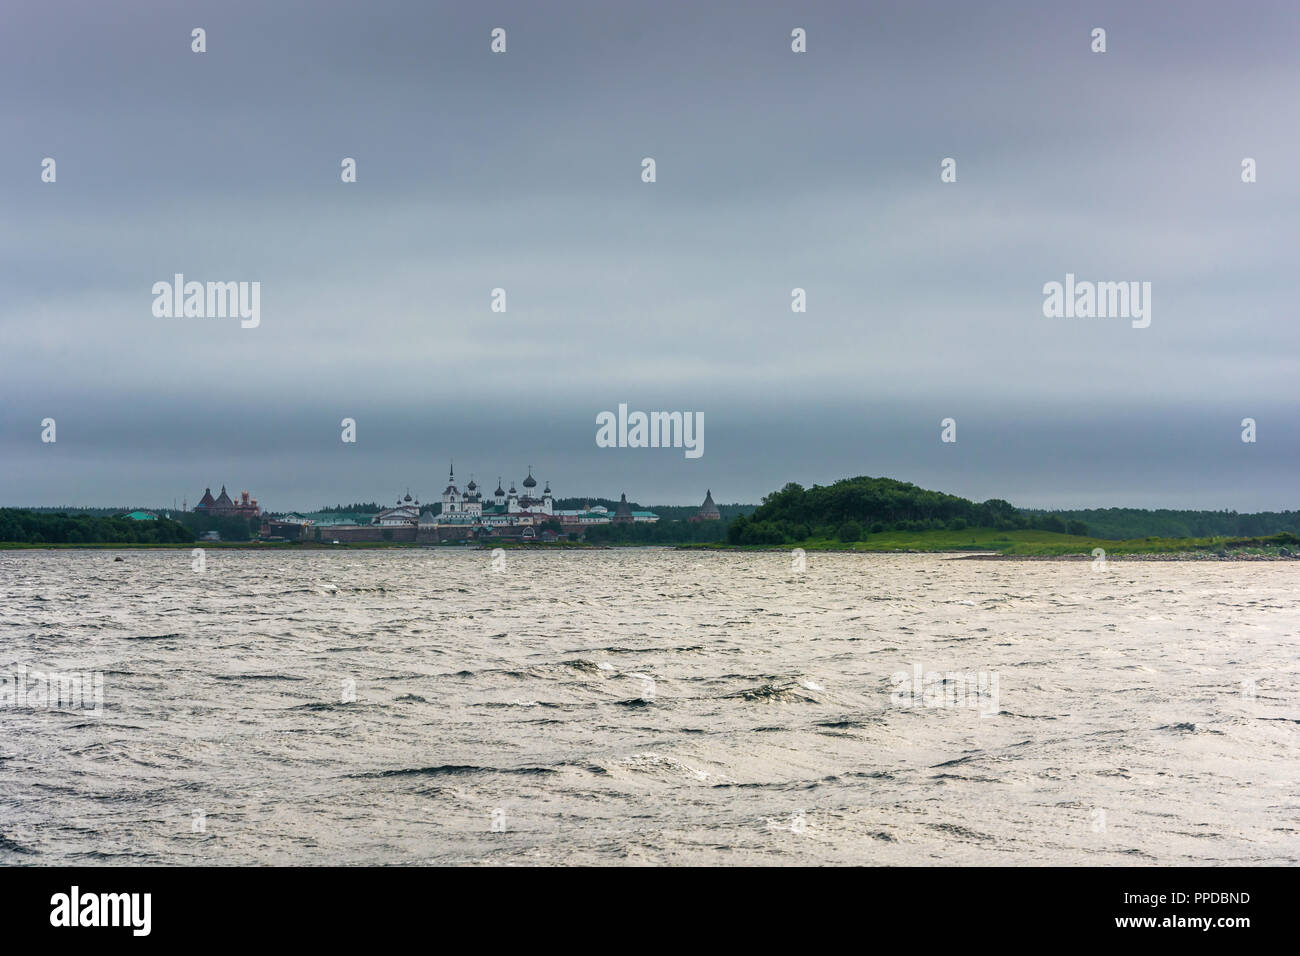 View of the Spaso-Preobrazhensky Solovetsky monastery with Onega bay on a cloudy day, Arkhangelsk oblast, Russia. Stock Photo